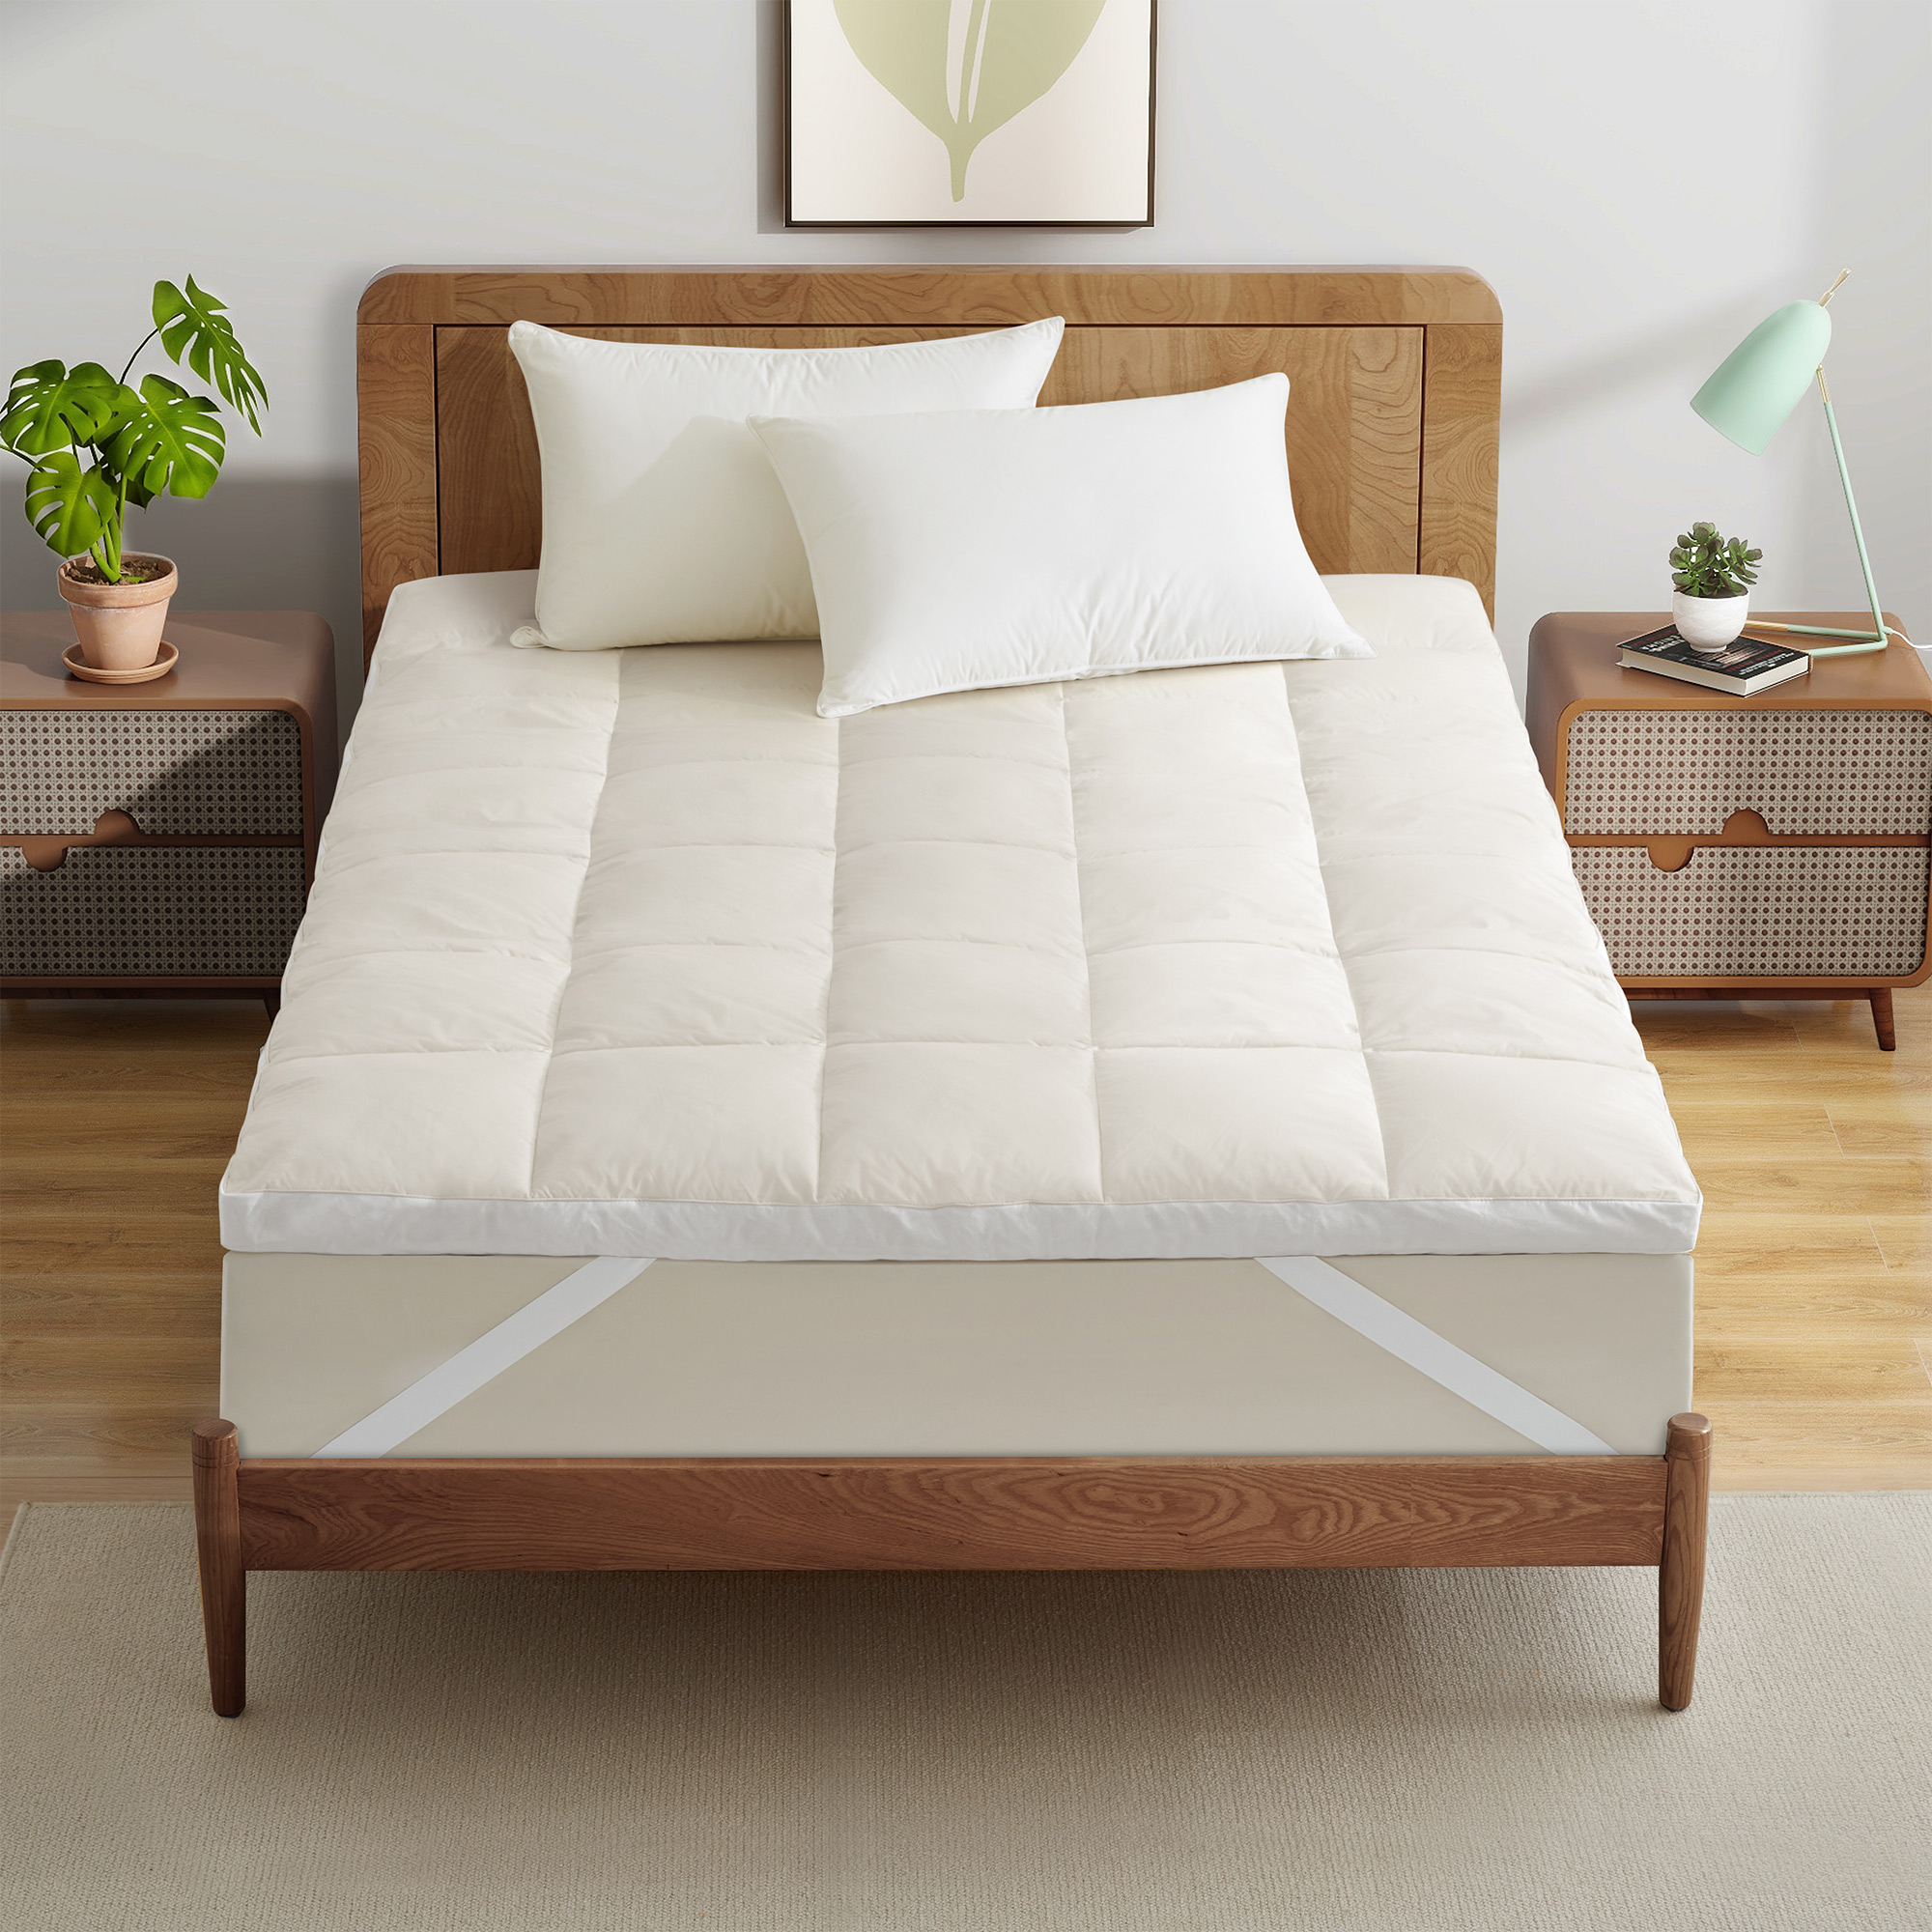 Organic Cotton Mattress Topper Feather Bed - Full